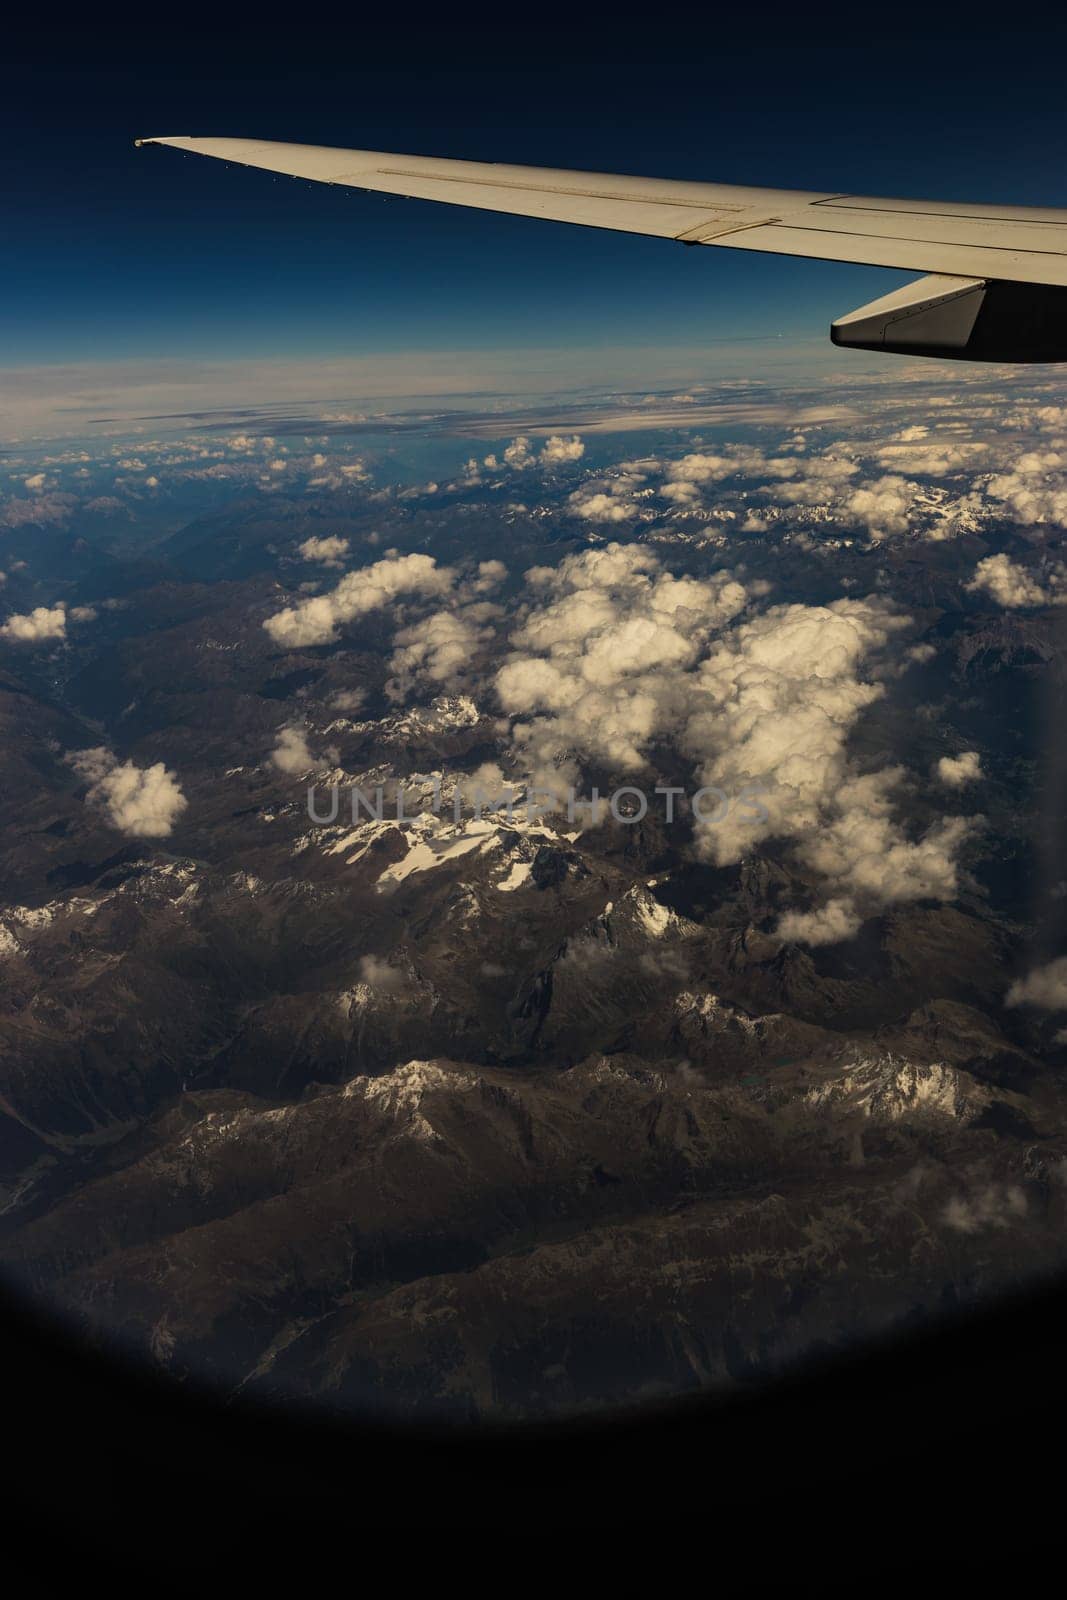 A beautiful view of an airplane wing, with rocky mountain tops in white clouds through the porthole window, close-up side view.